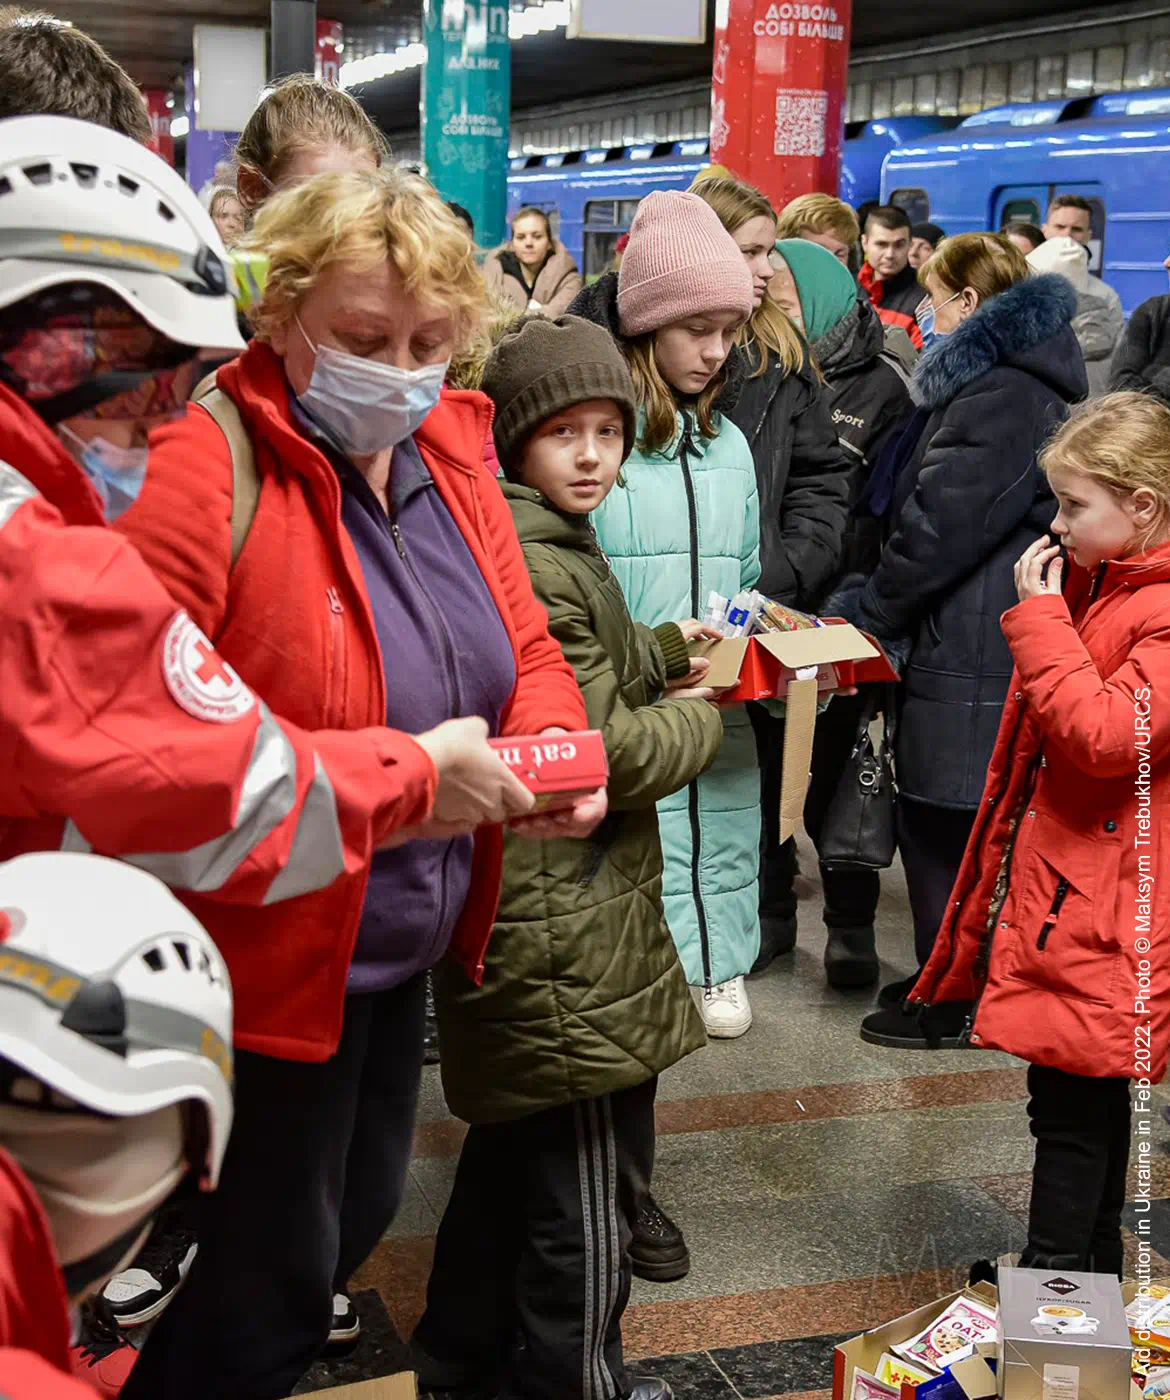 Aid distribution in a subway station to 8,000 people in Ukraine